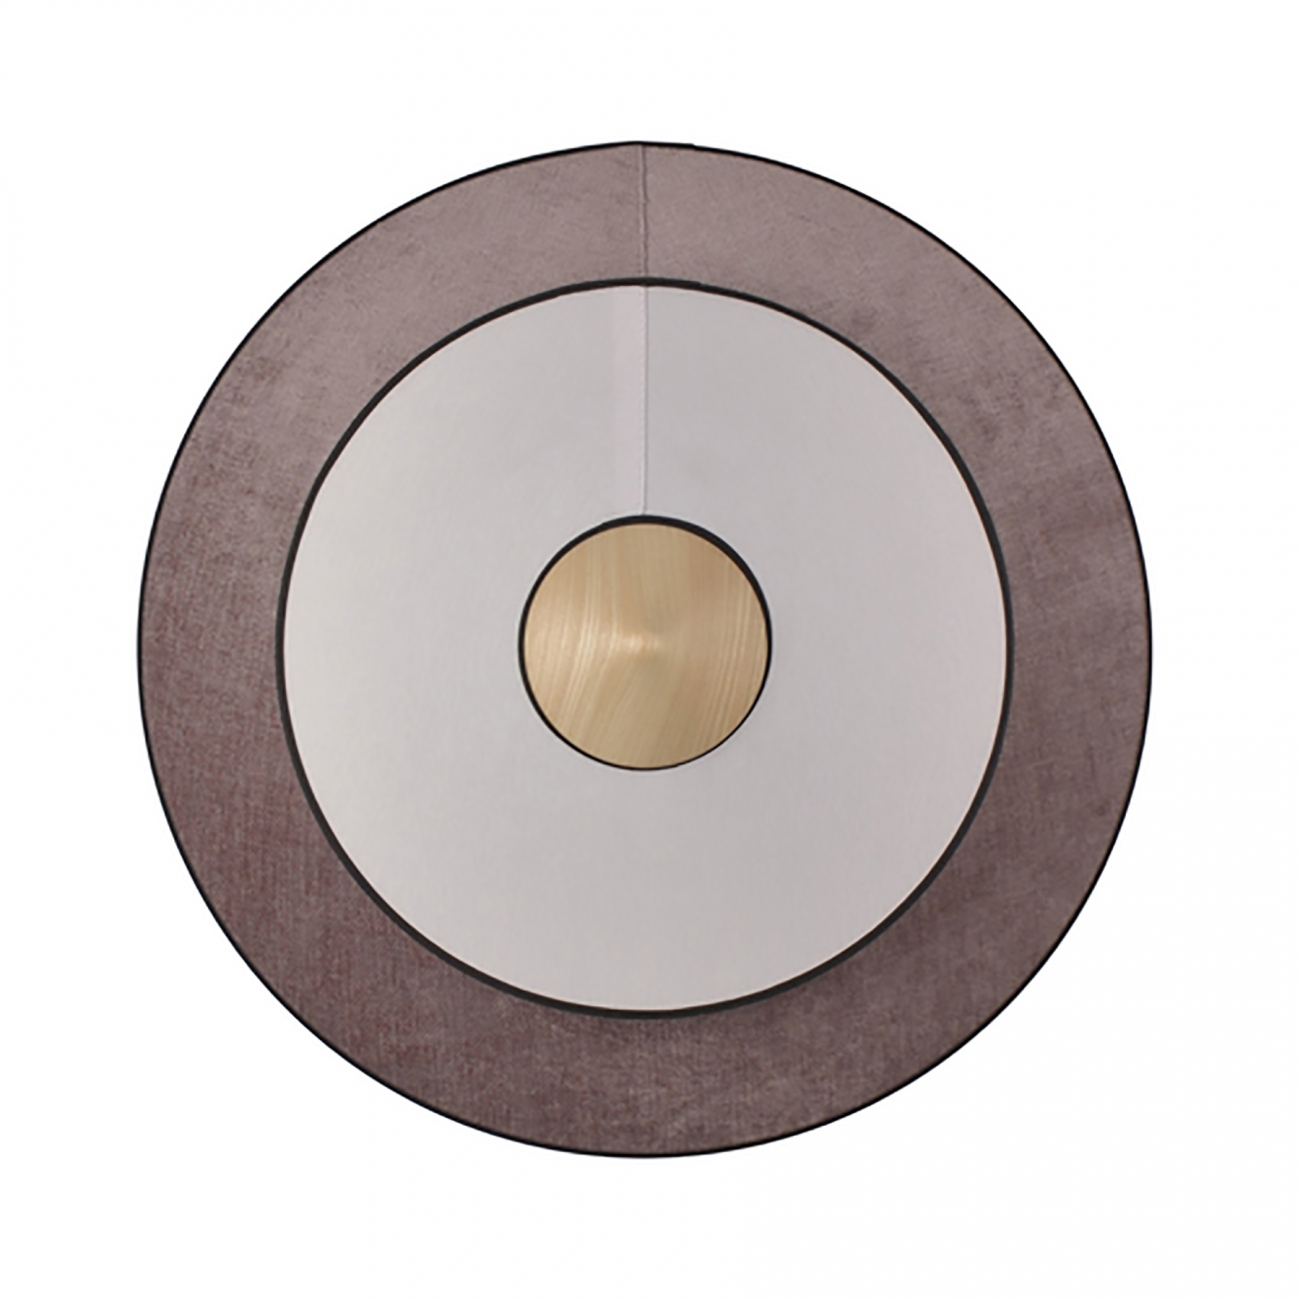 Forestier Paris Cymbal S wall lamp